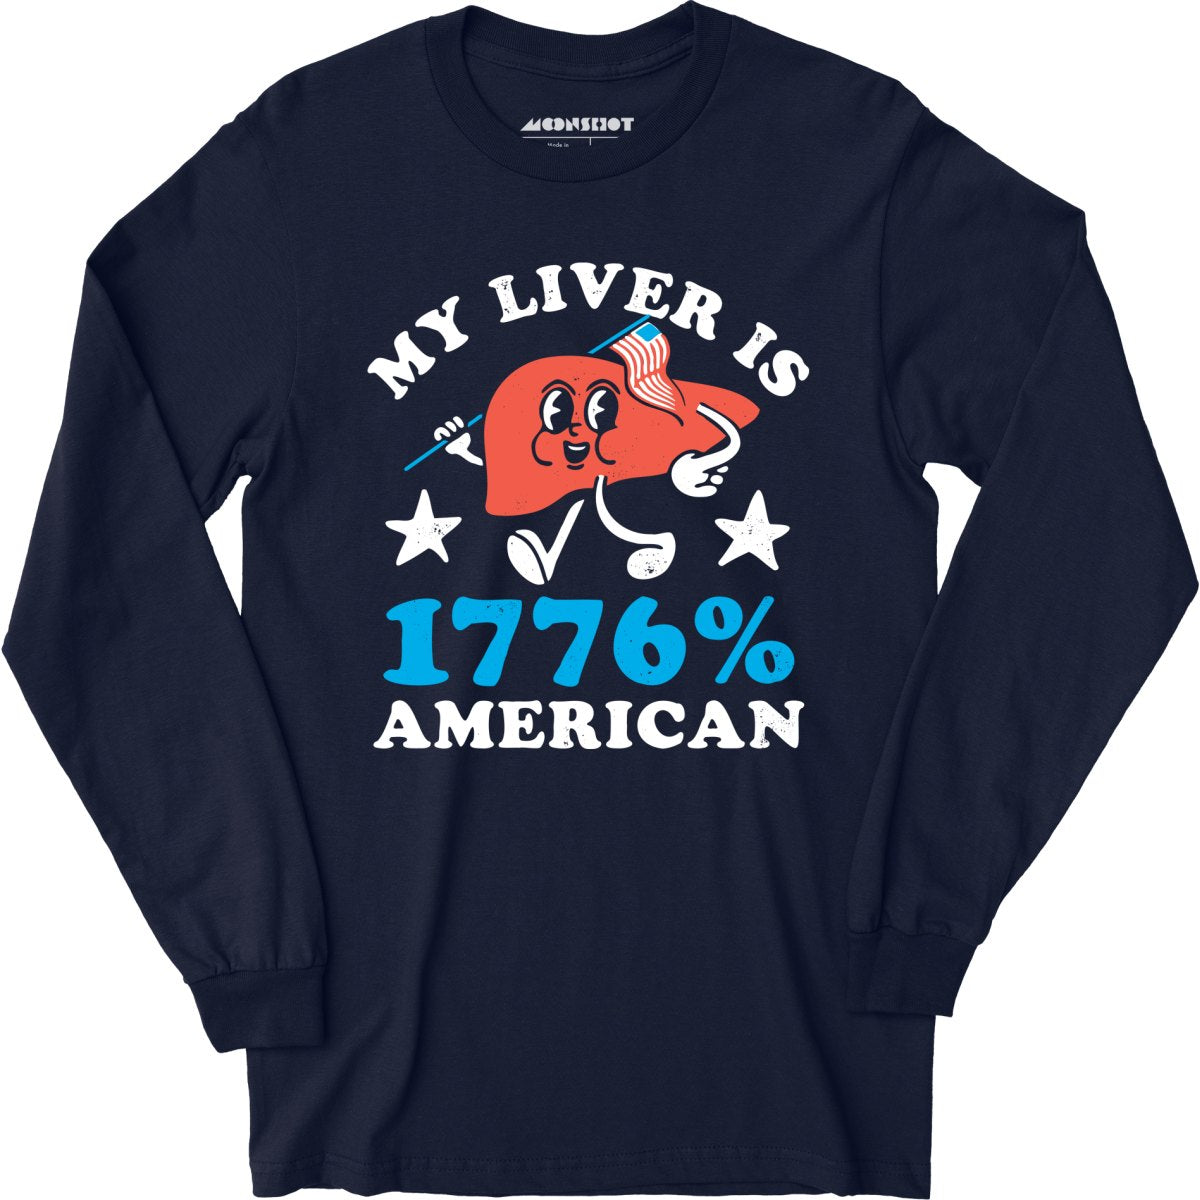 My Liver is 1776 Percent American - Long Sleeve T-Shirt